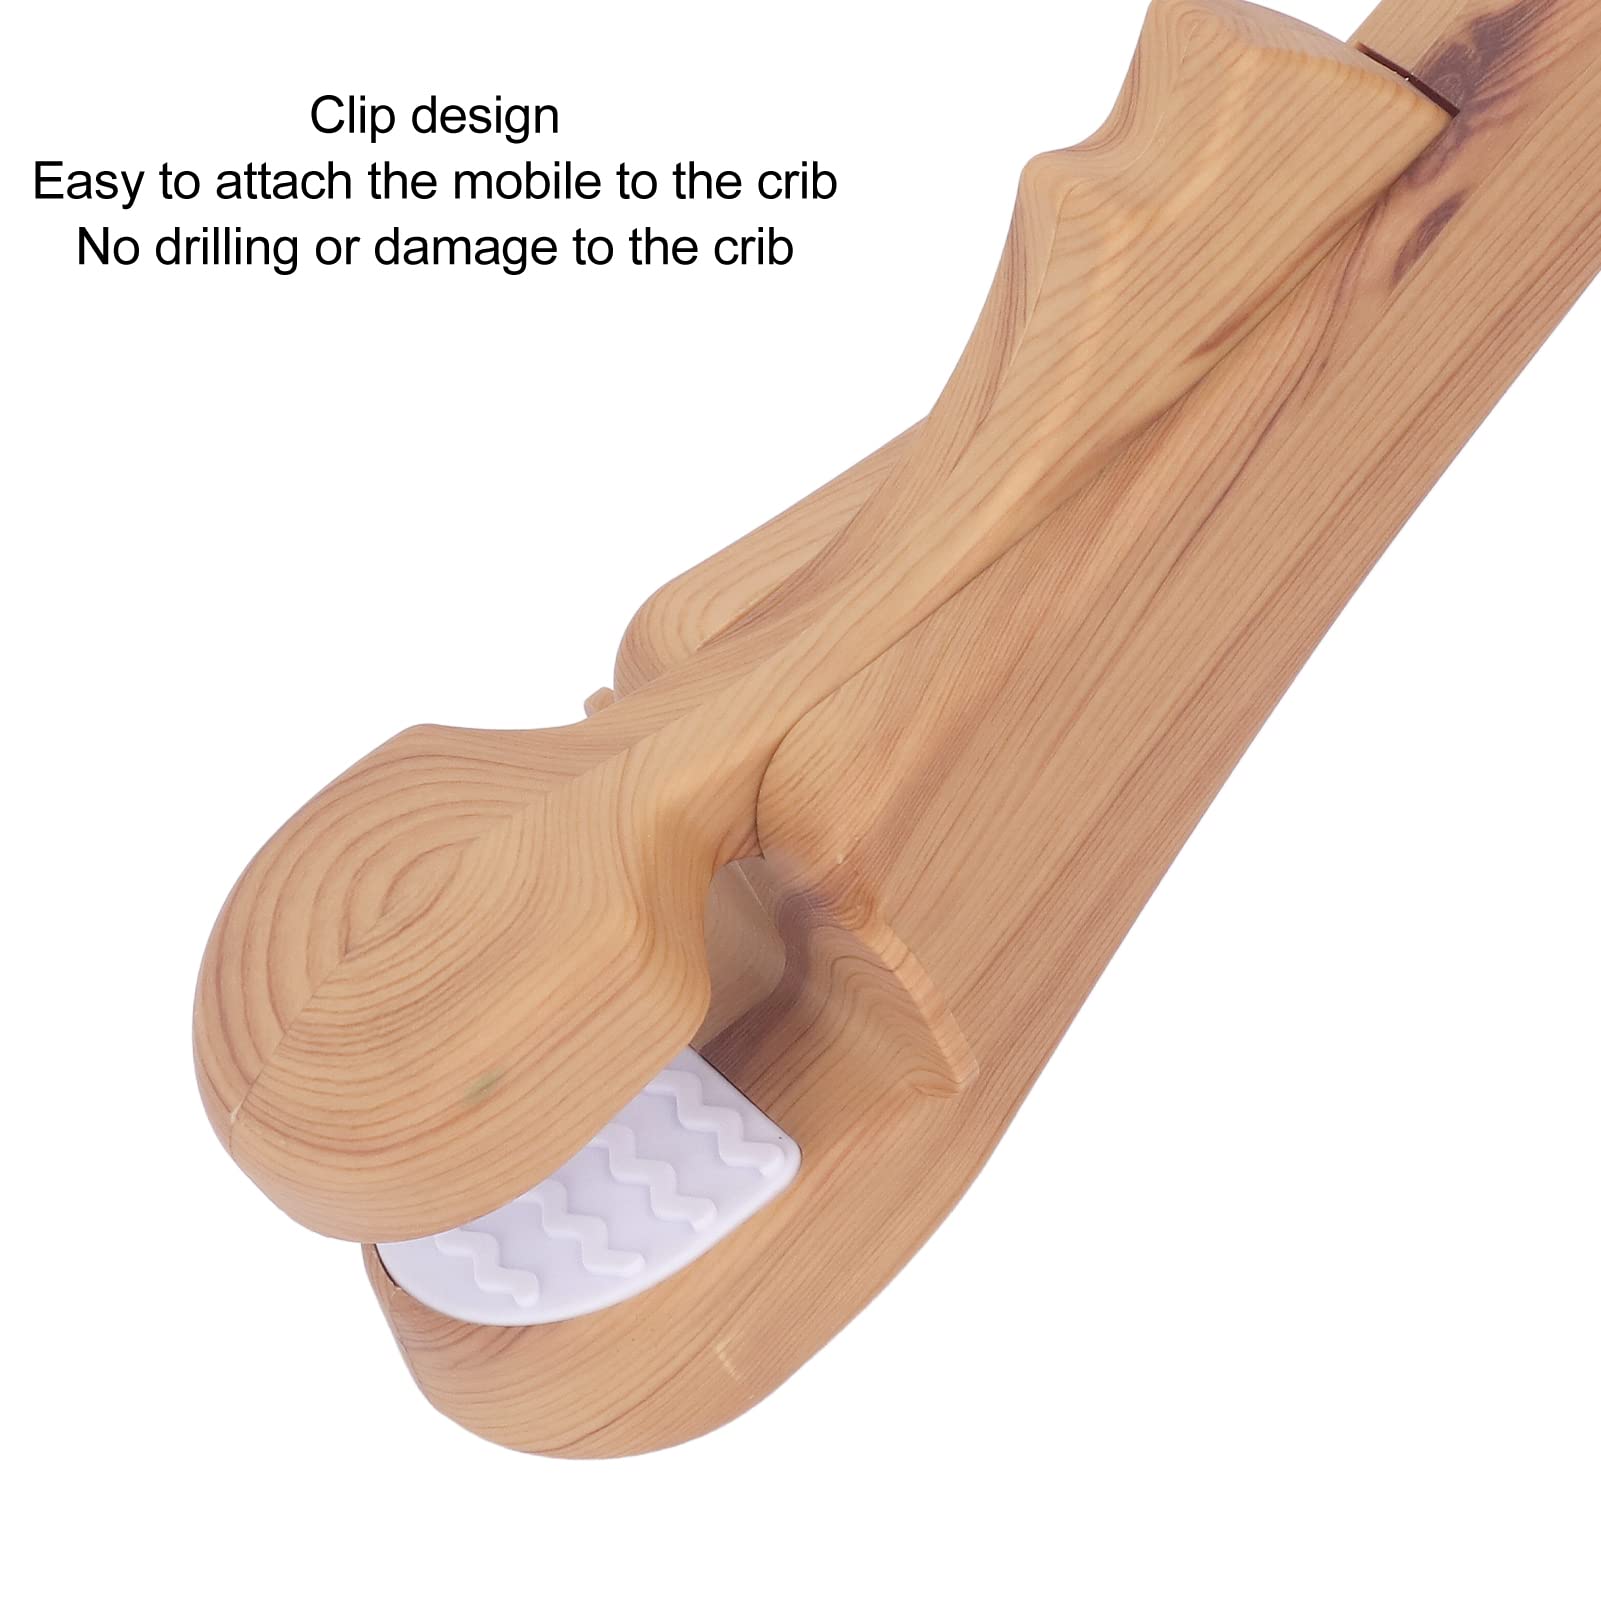 Crib Mobile Arm, Mobile Arm For Crib, Secure Wood Grain Faux Crib Furniture Support Mobile Holder For Crib Baby Crib Mobile Arm for Crib Toys Accessories